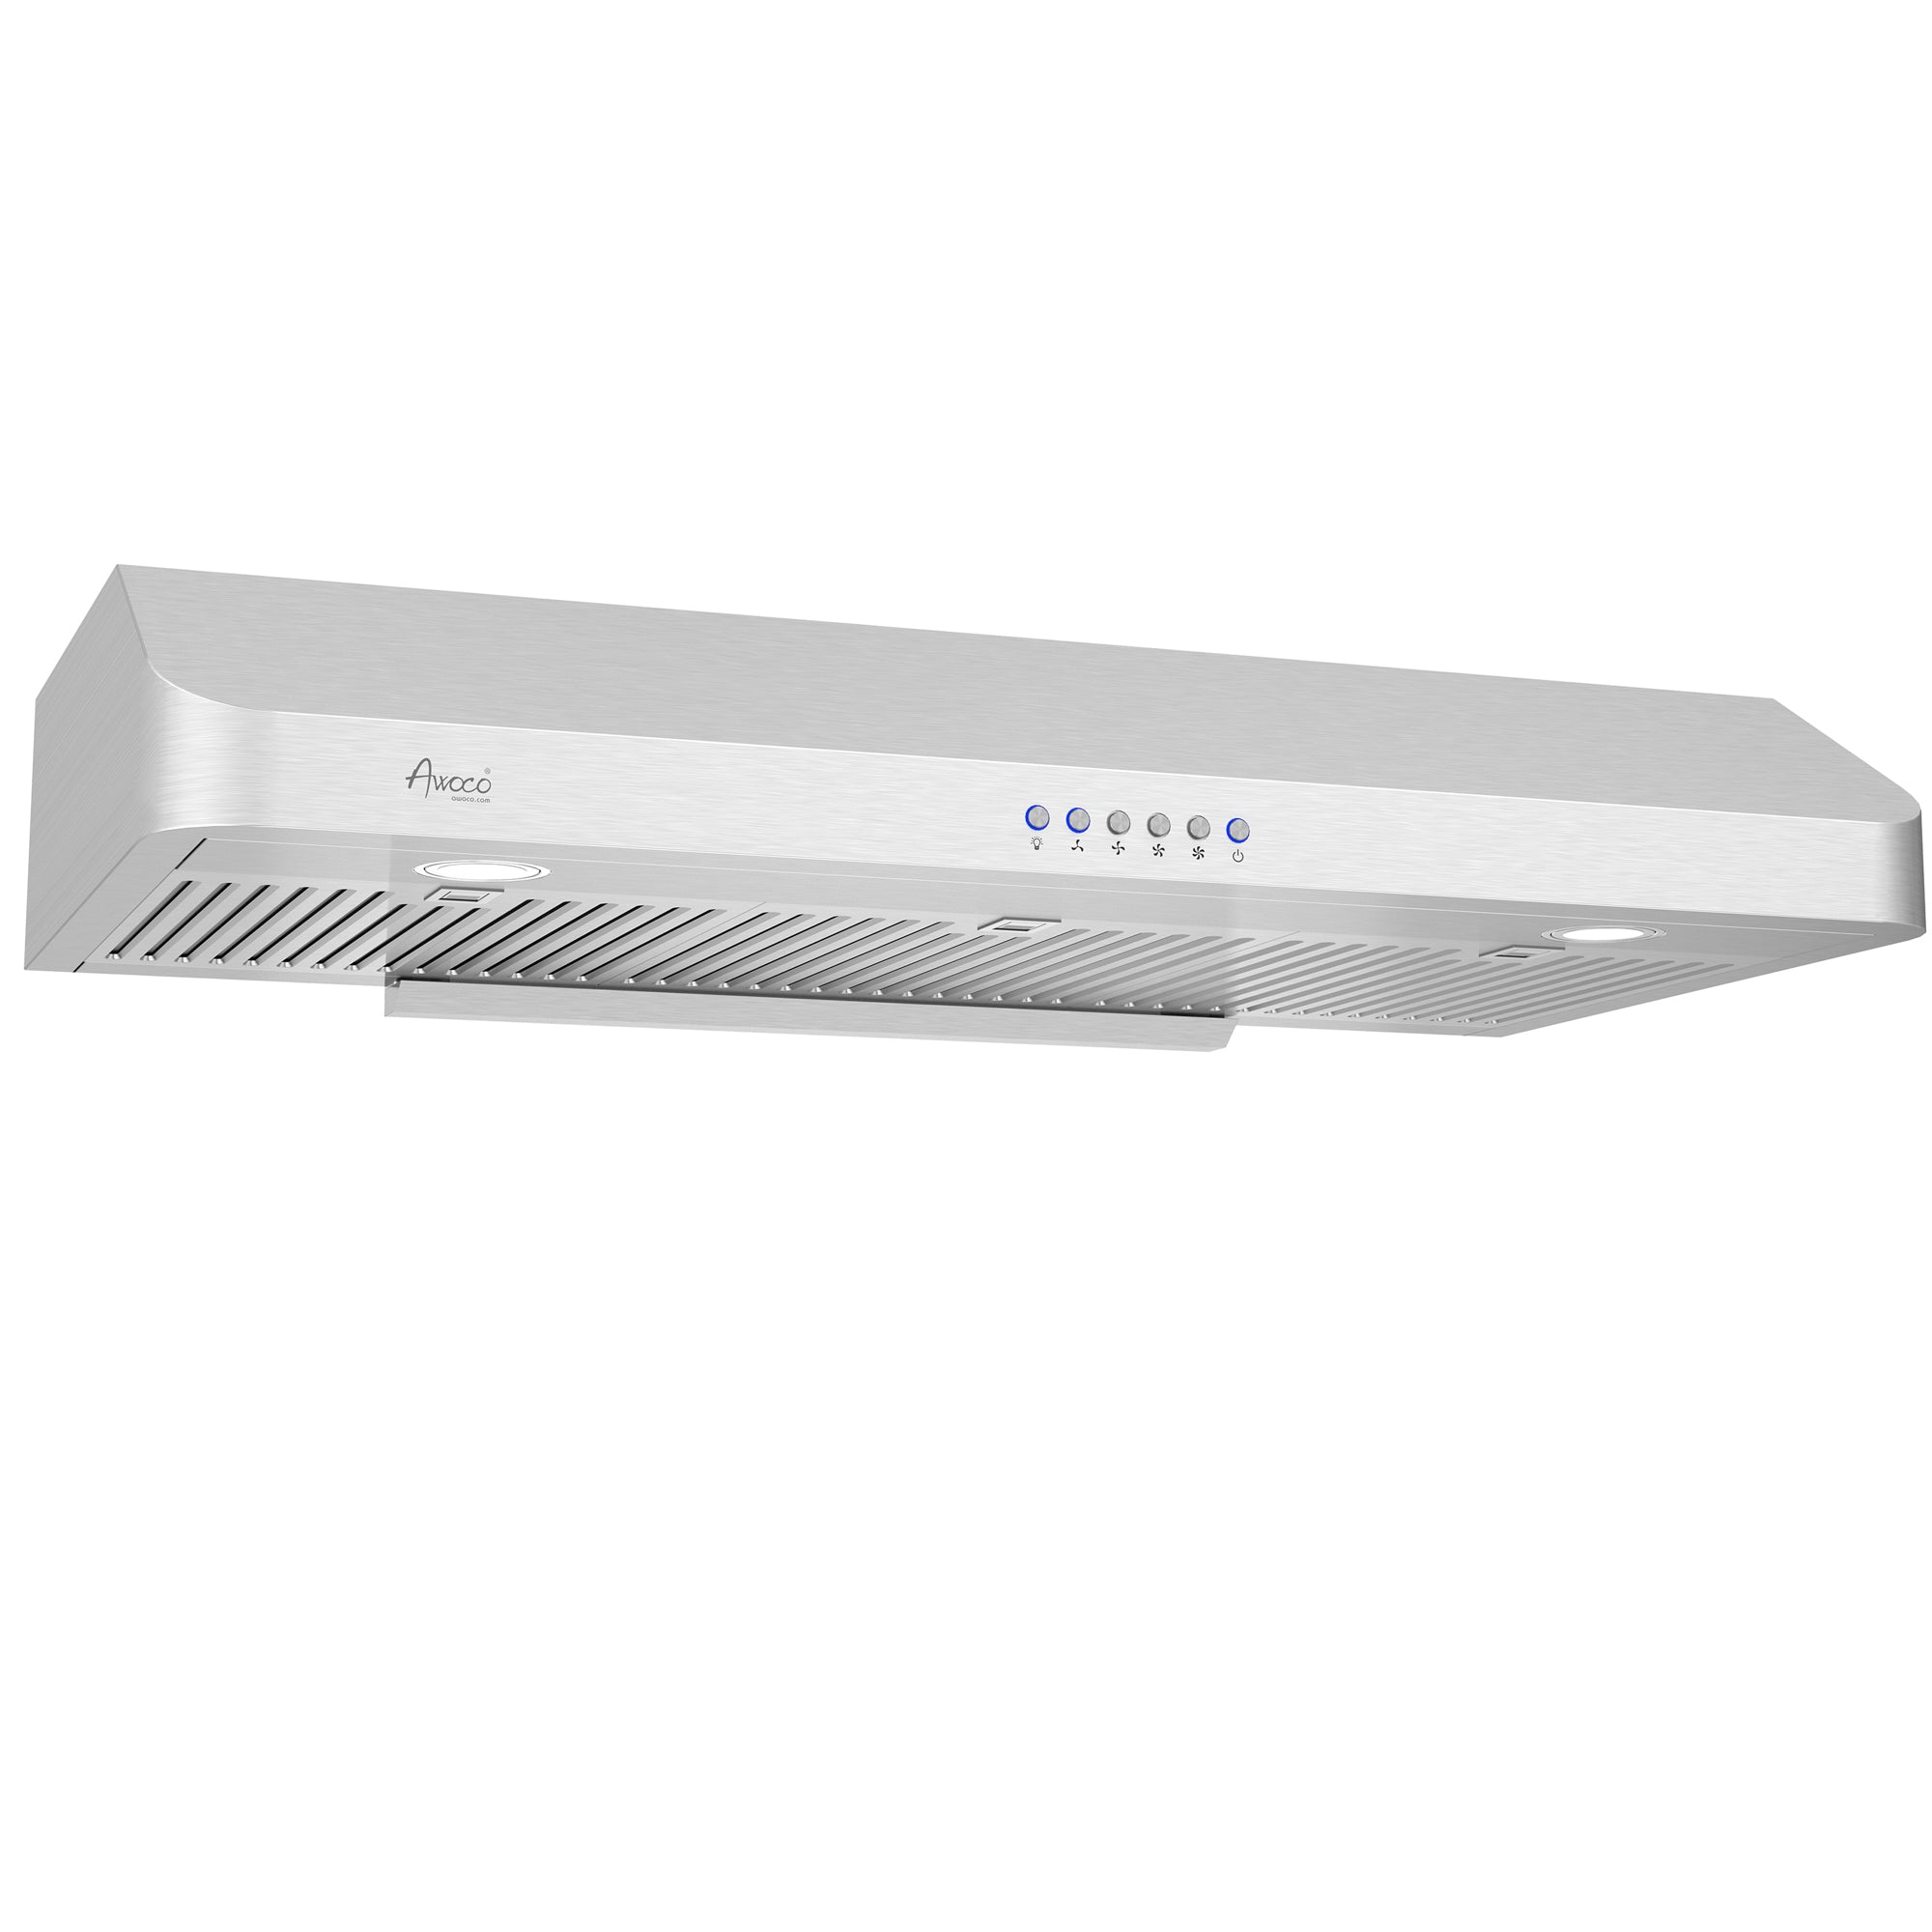 Awoco RH-C06-42 Classic 6" High Stainless Steel Under Cabinet 4 Speeds 900CFM Range Hood with 2 LED Lights